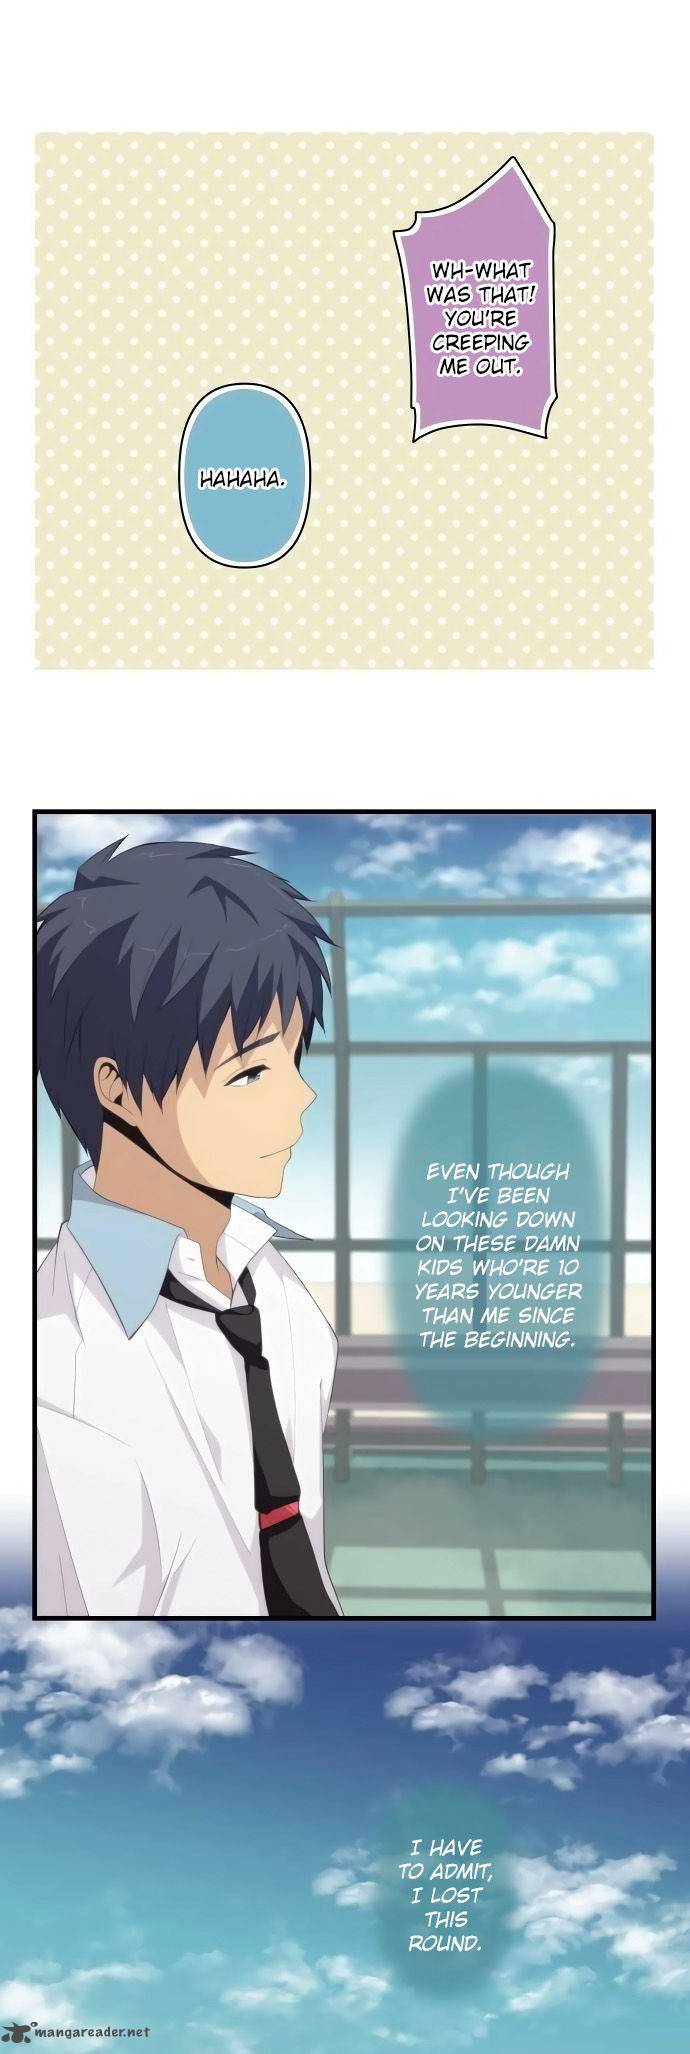 relife_146_5